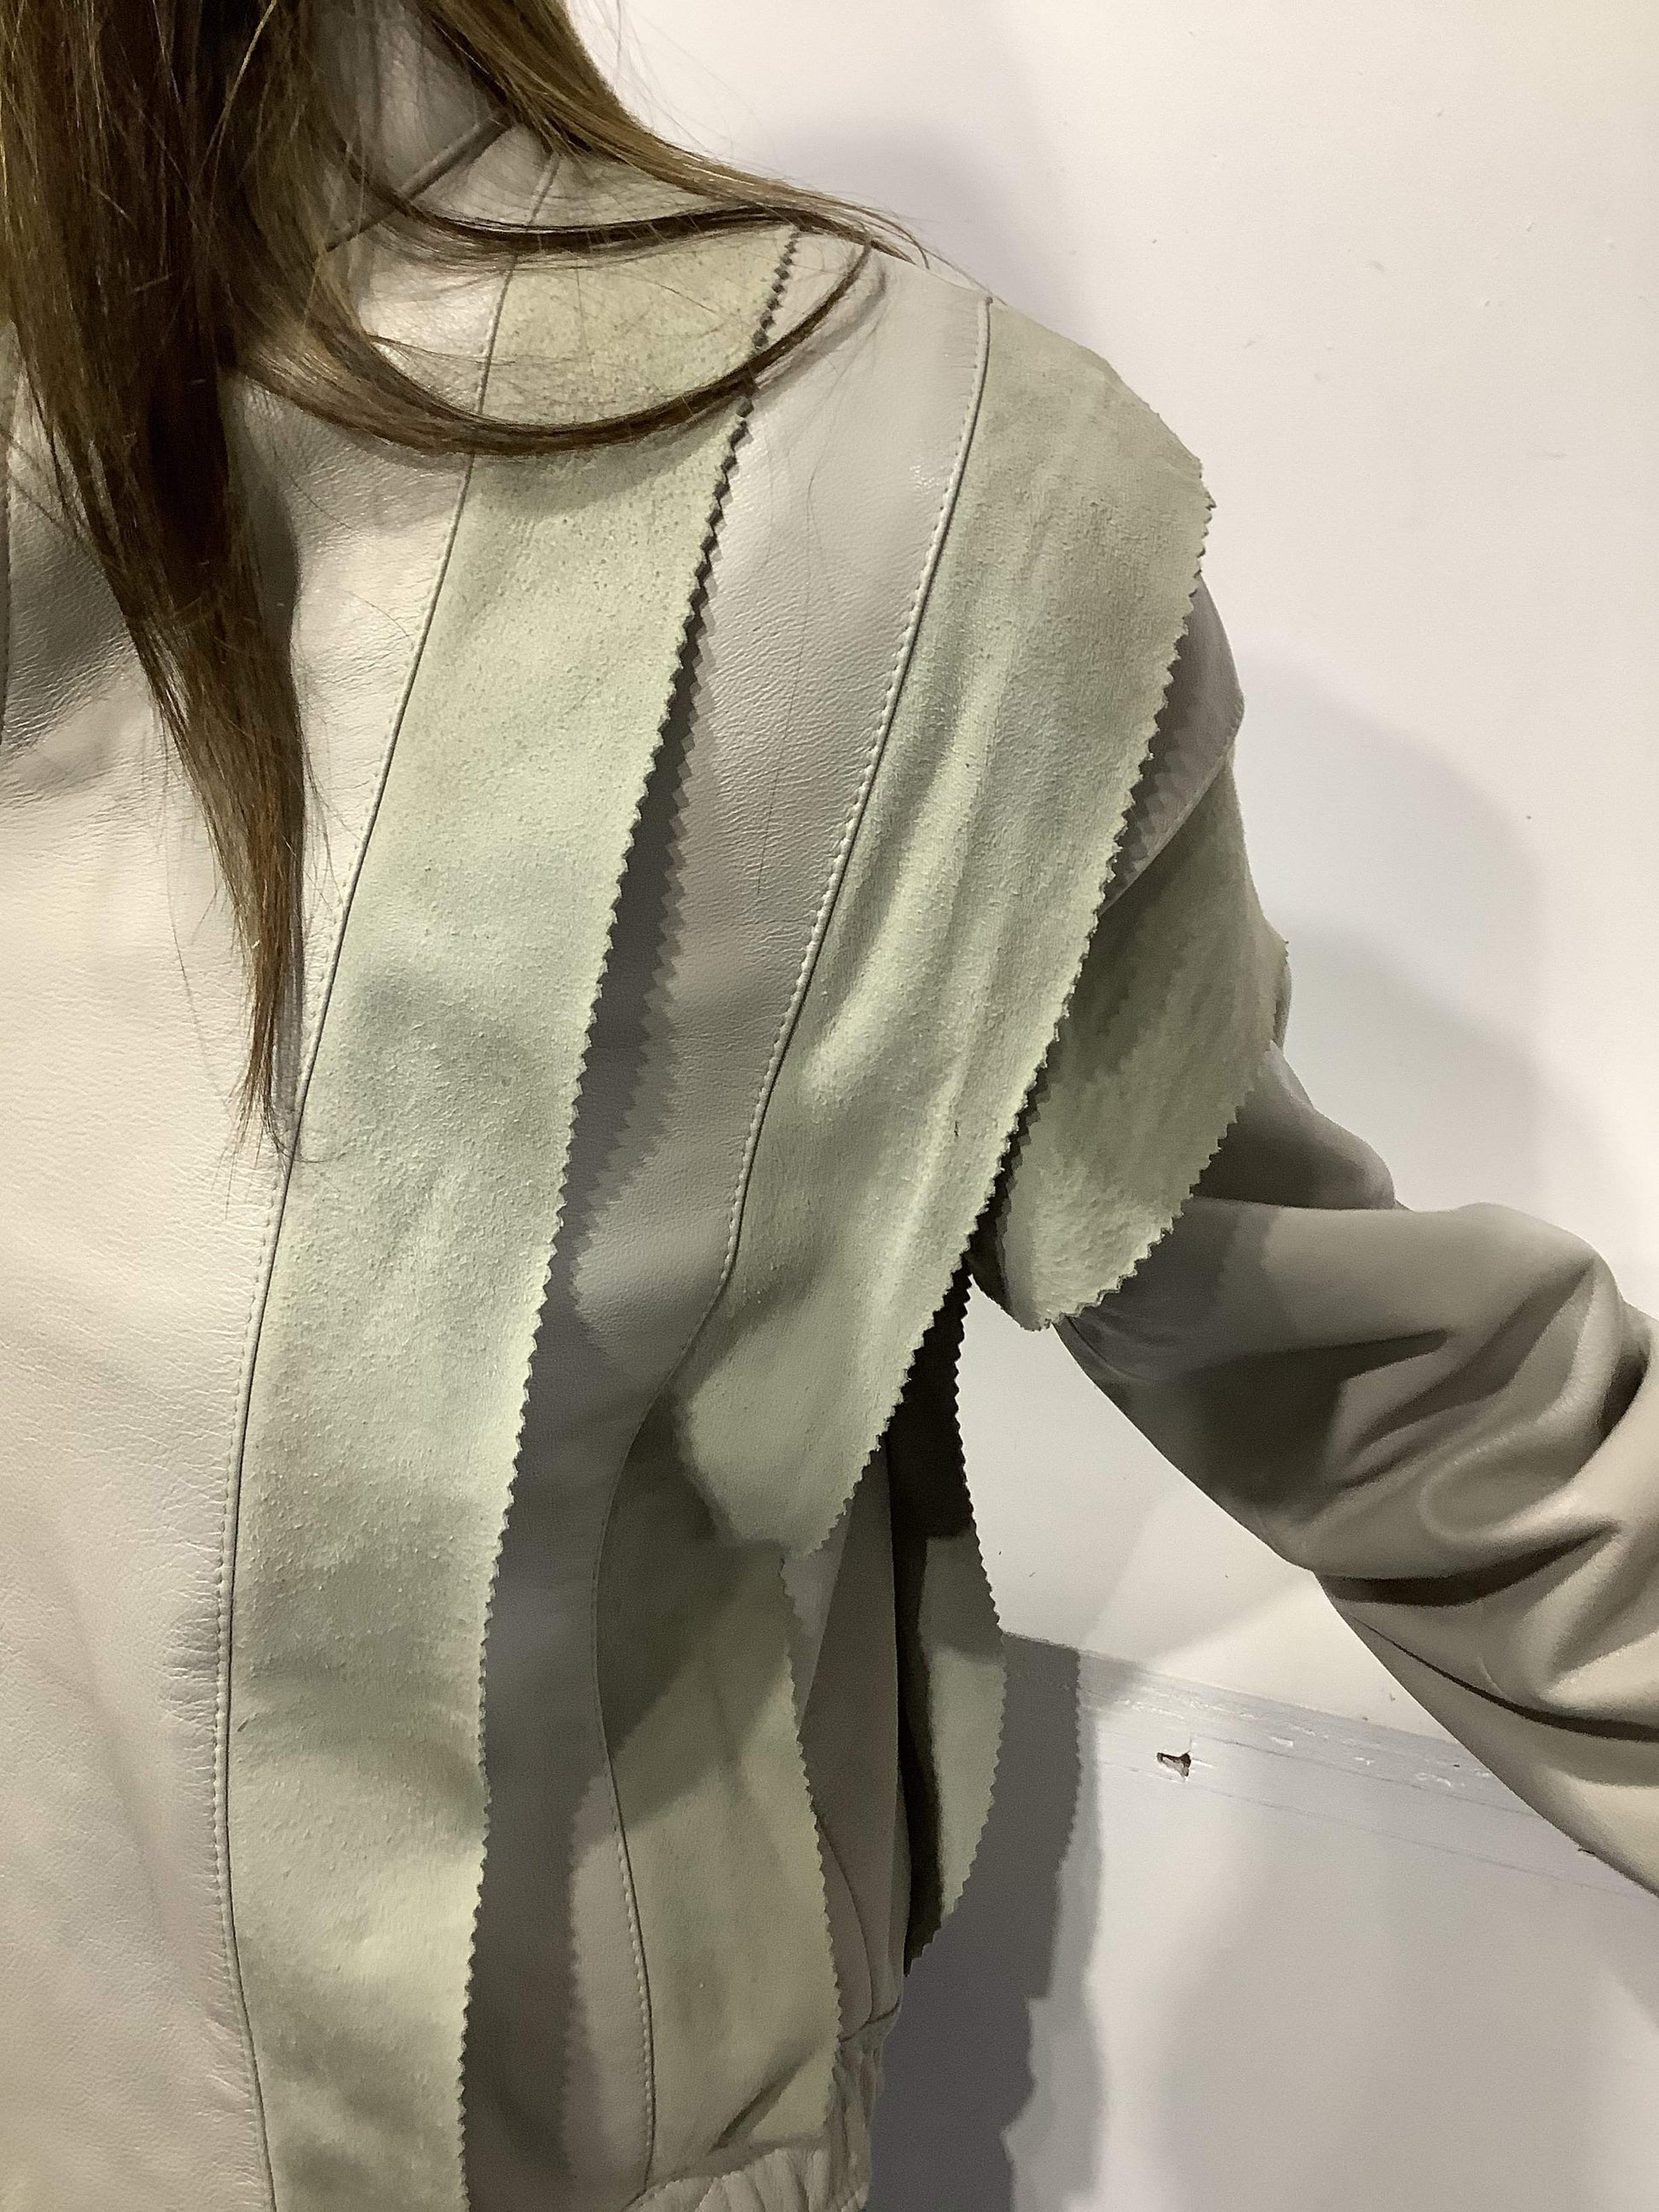 GREY-Bitter and Better-90s,asymmetric,fashion,grey jacket,jacket,Leather,leather jacket,leren jas,sustainable,vintage